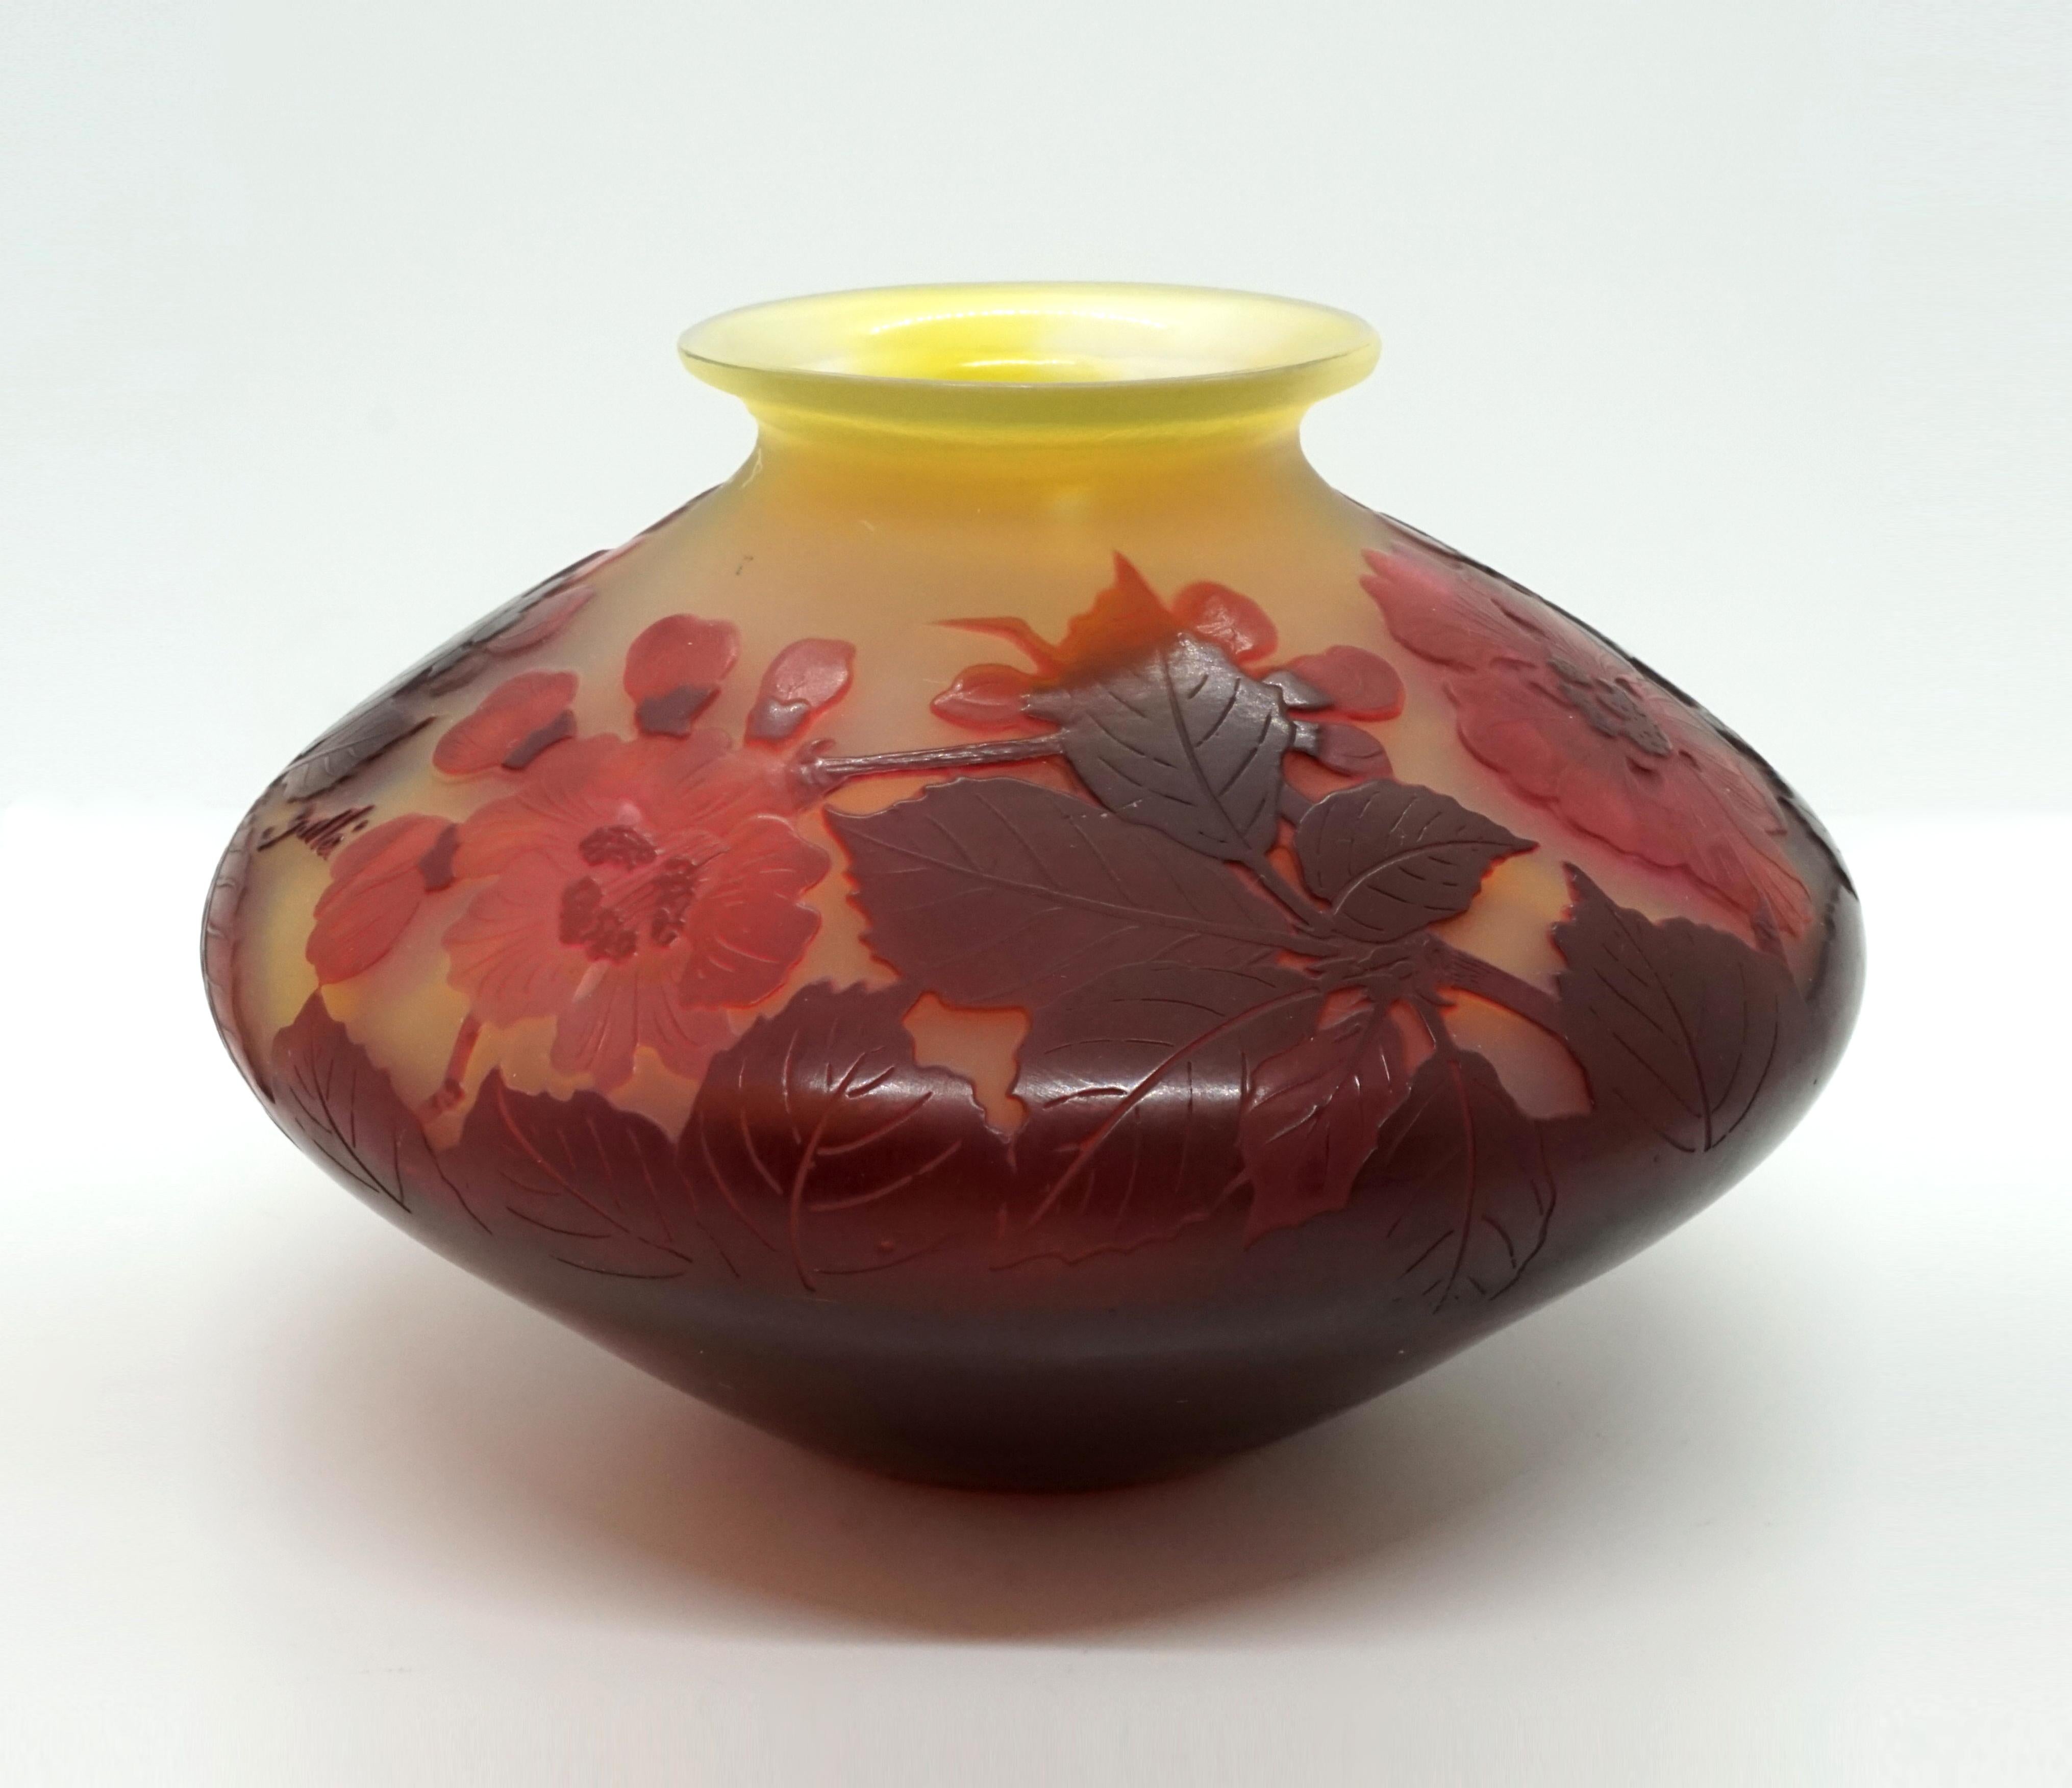 Japanese-inspired, discus-shaped vase with a short neck and a flared mouth rim. Stand on a small round floor plan without a foot. The lower half, apart from the base, is completely covered in burgundy red, the upper part is etched decor with